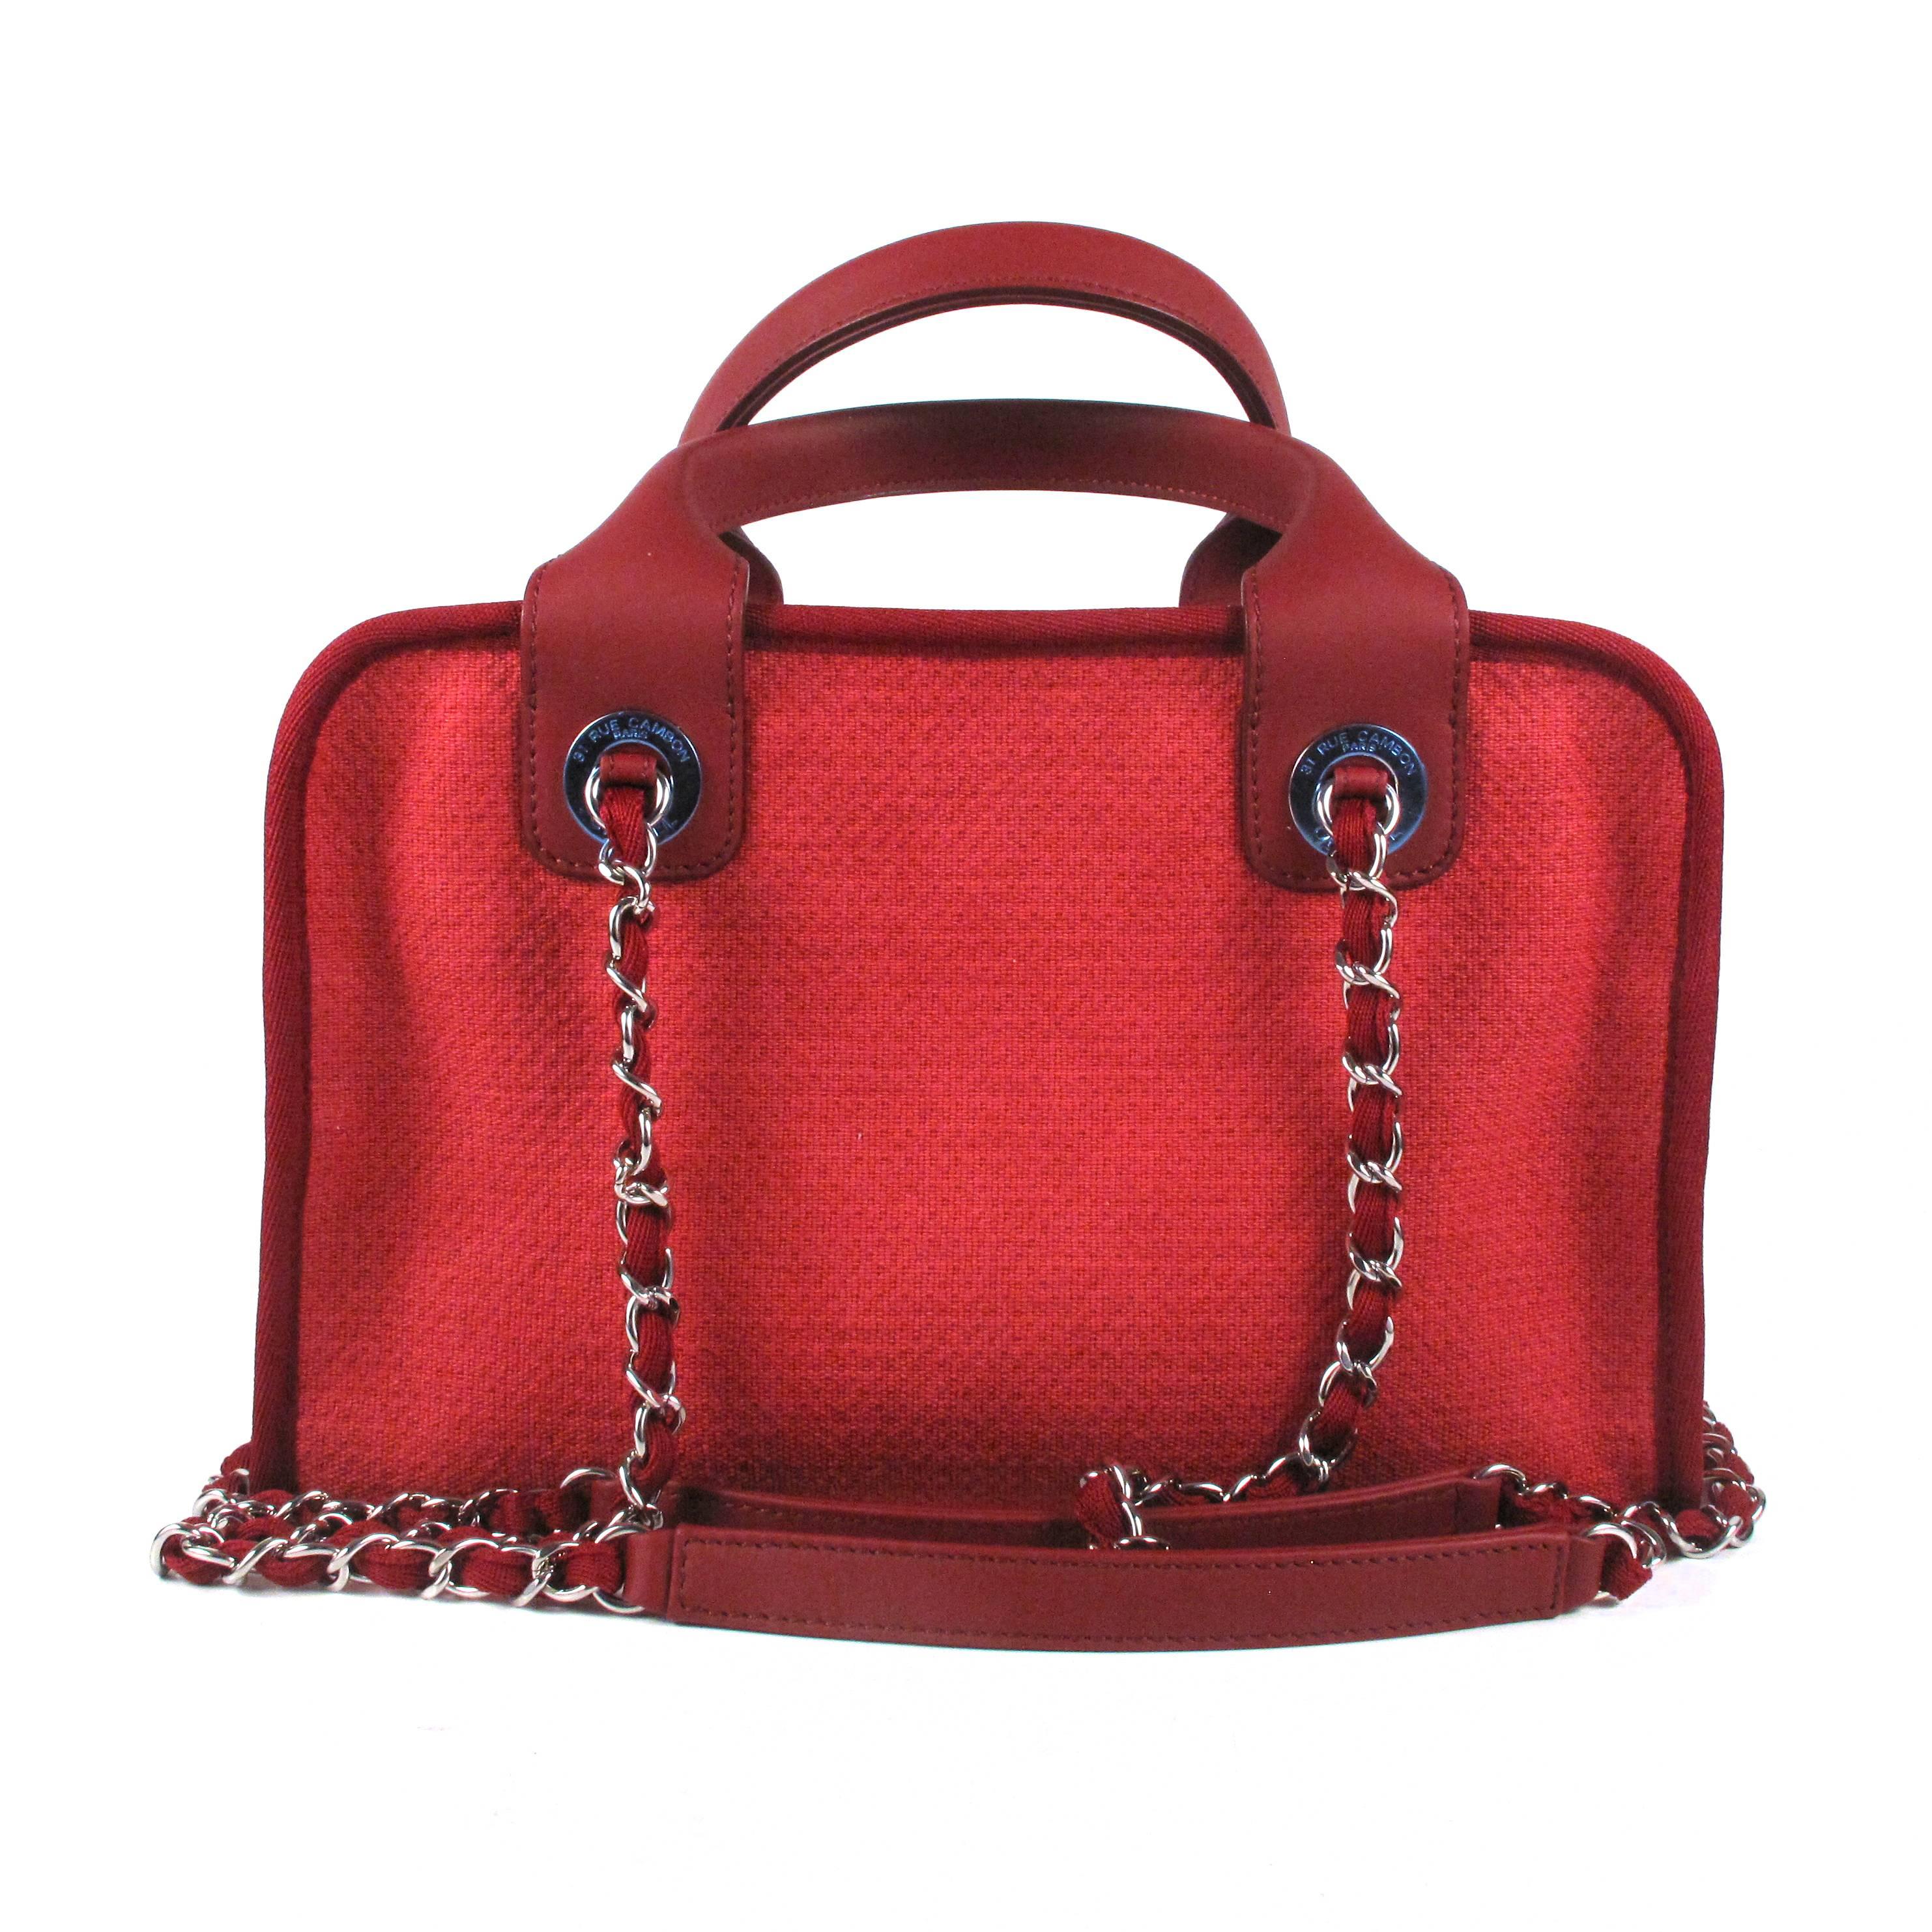 Chanel - Deauville Bowling Bag

Color: Red

Material: Canvas & Leather

------------------------------------------------------------

Details:

- silver tone hardware

- dual shoulder chain straps

- dual rolled leather handles

- CC